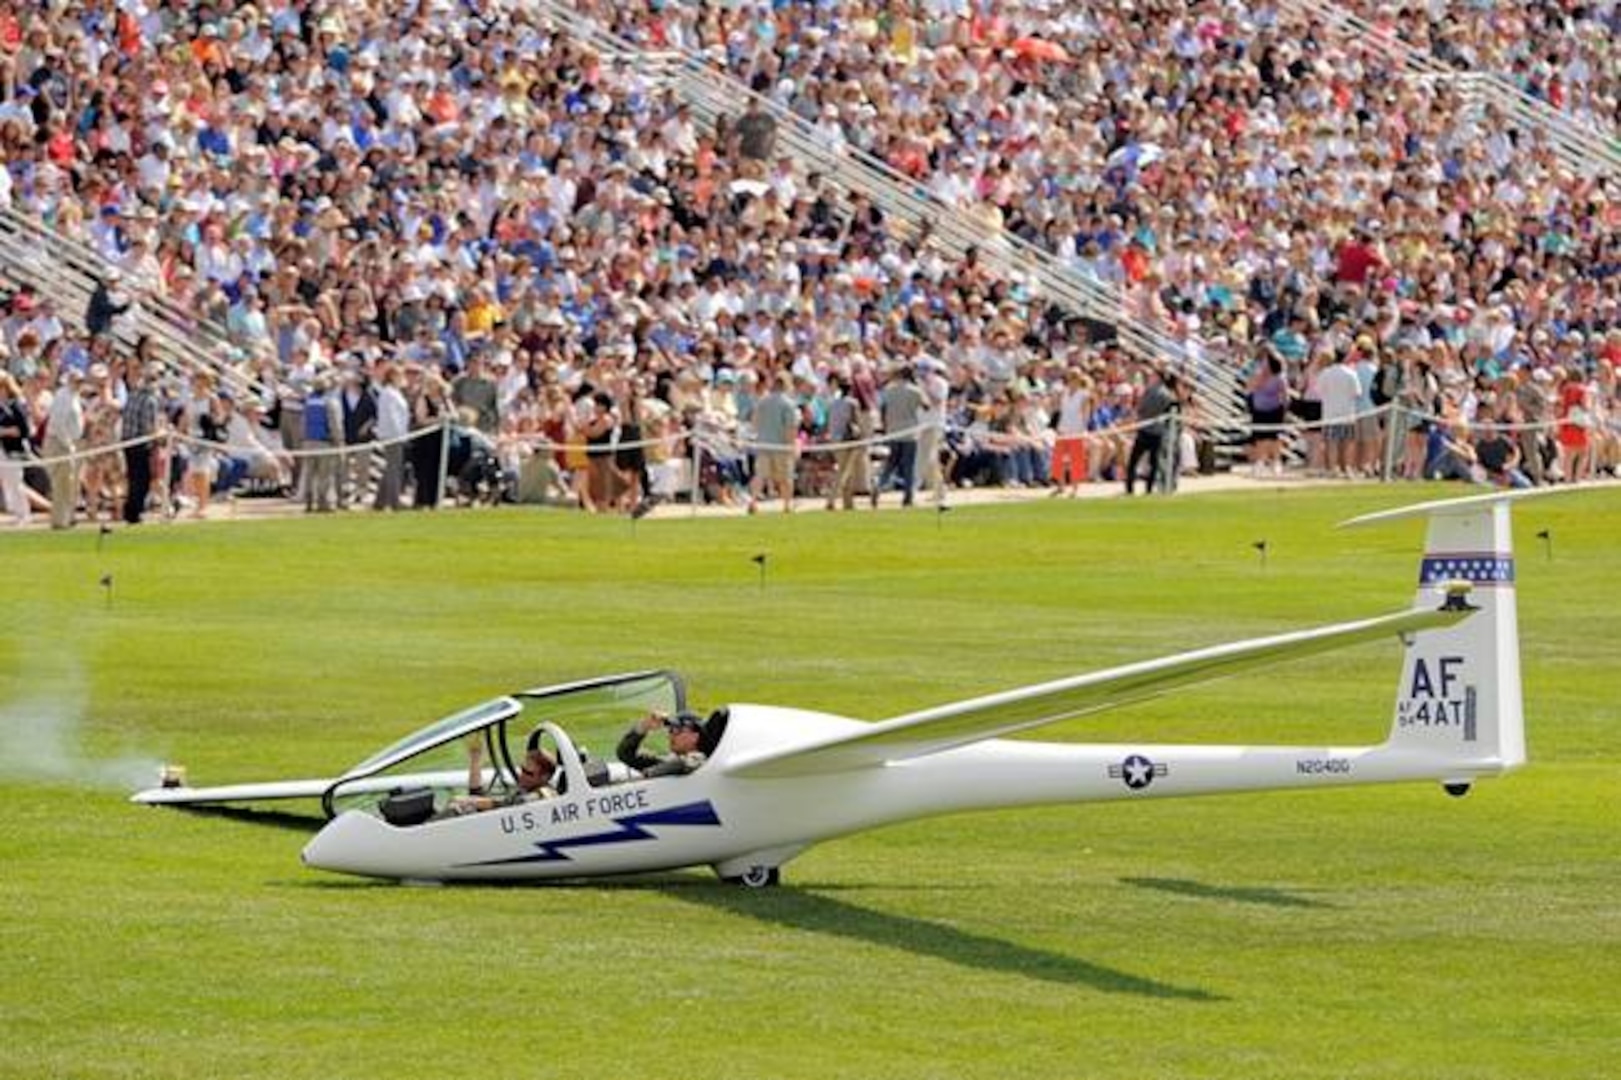 A TG-16, used by the 94th Flying Training Squadron to conduct the U.S Air Force Academy's soaring airmanship program, lands on the Academy's parade field following a demonstration. The 94th FTS conducts more than 16,000 training and competition soaring sorties annually using 24 TG-15 and TG-16 aircraft.  The squadron focuses on developing officership, leadership and character in the more than 1,600 Academy cadets who go through its program each year. (Courtesy photo)